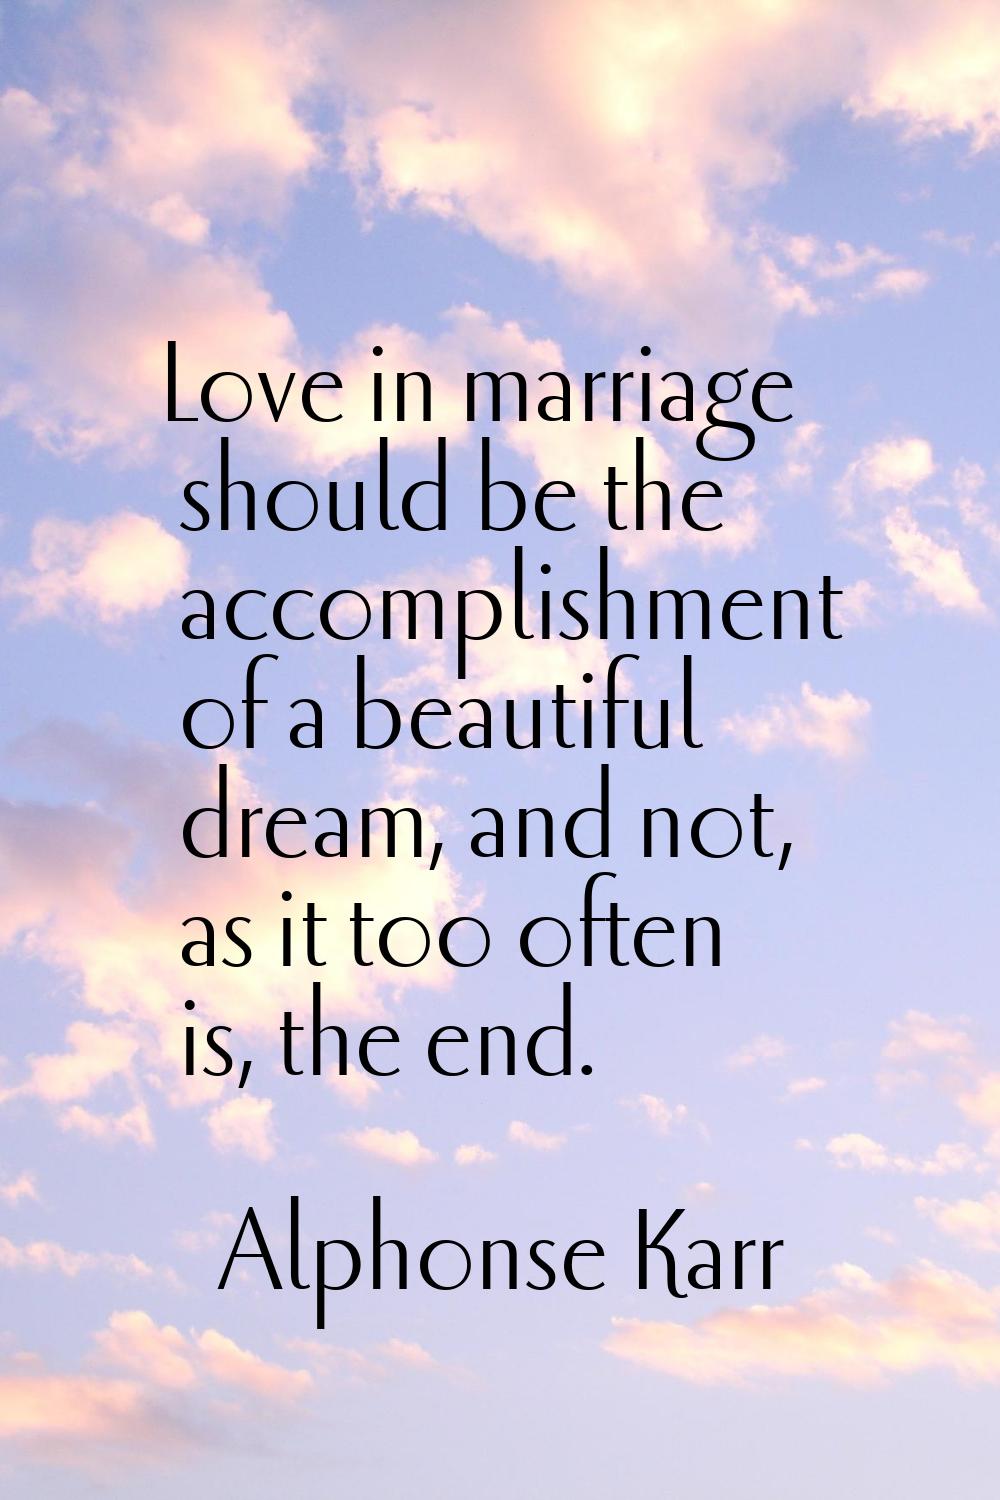 Love in marriage should be the accomplishment of a beautiful dream, and not, as it too often is, th